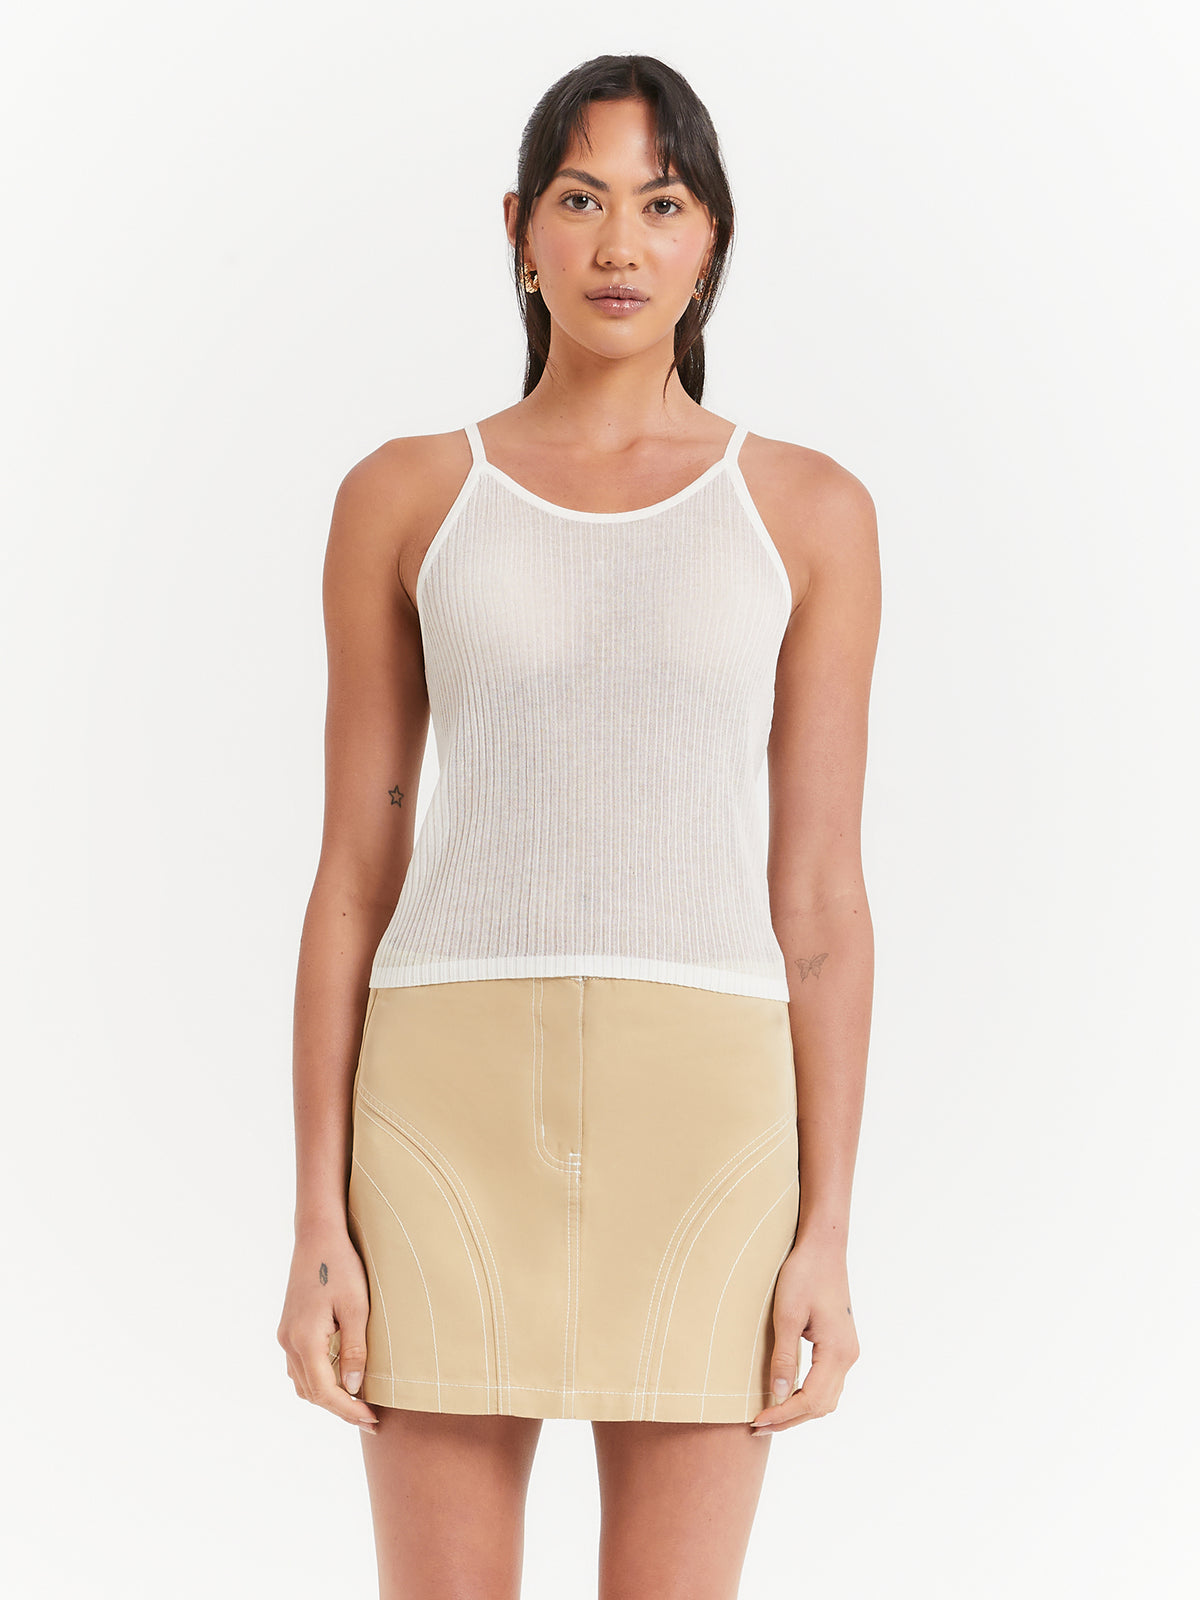 Beyond Her Adelaide Sheer Tank Top in Off-White | Off White